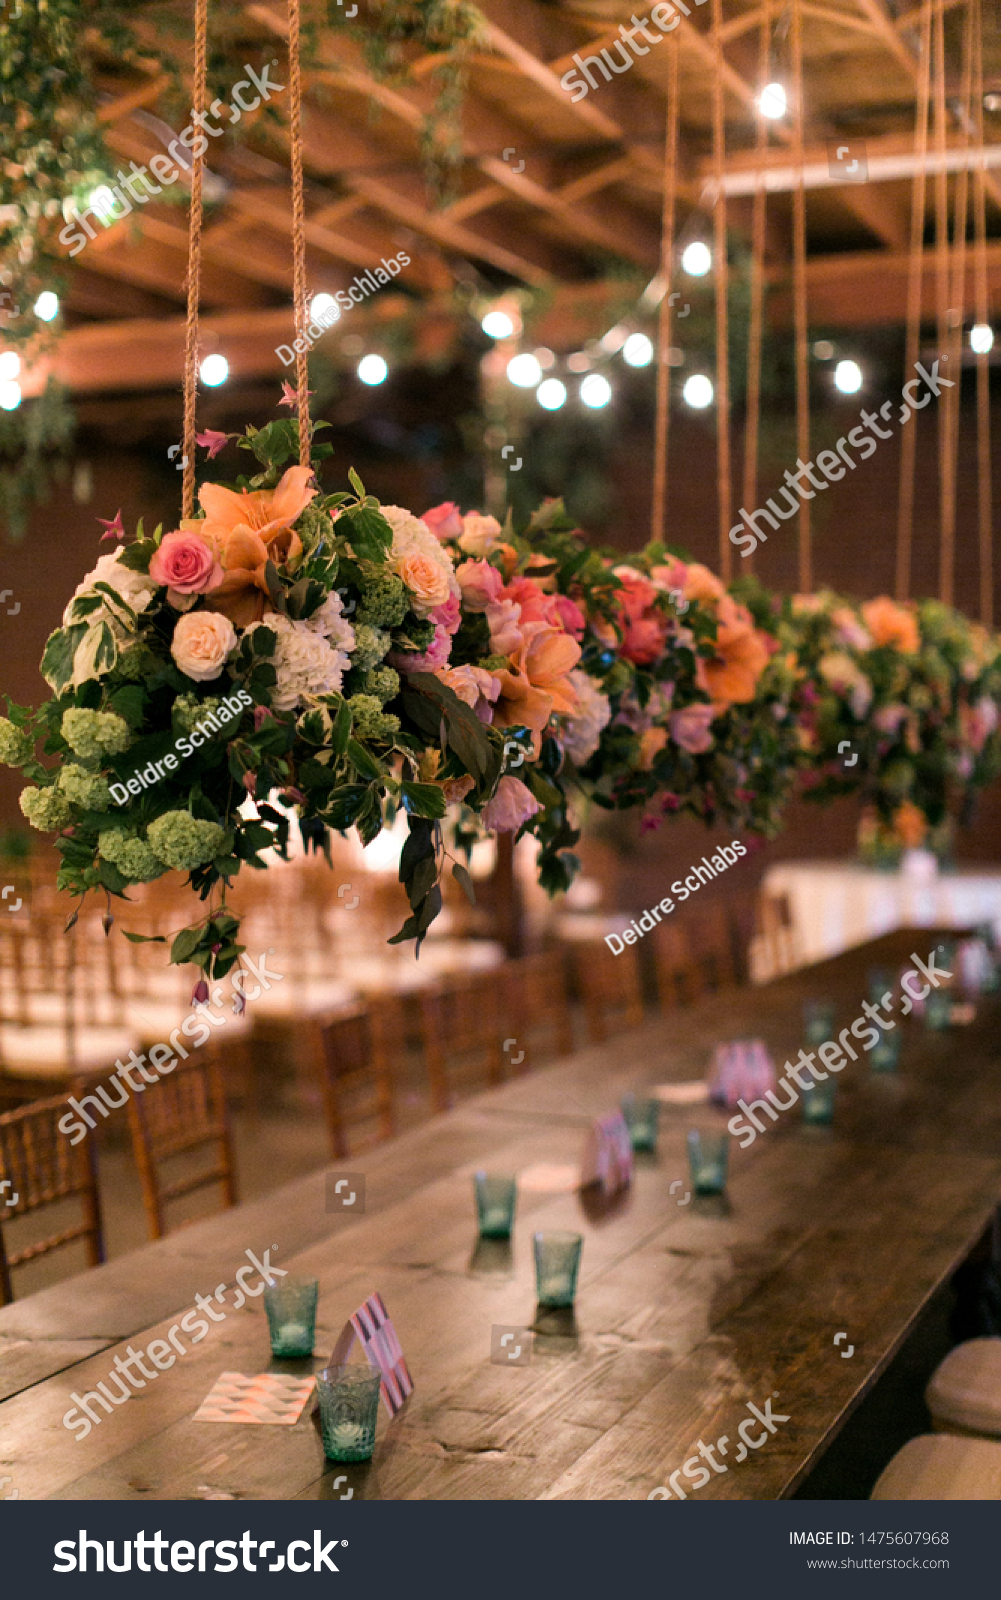 flowers hanging from ceiling wedding